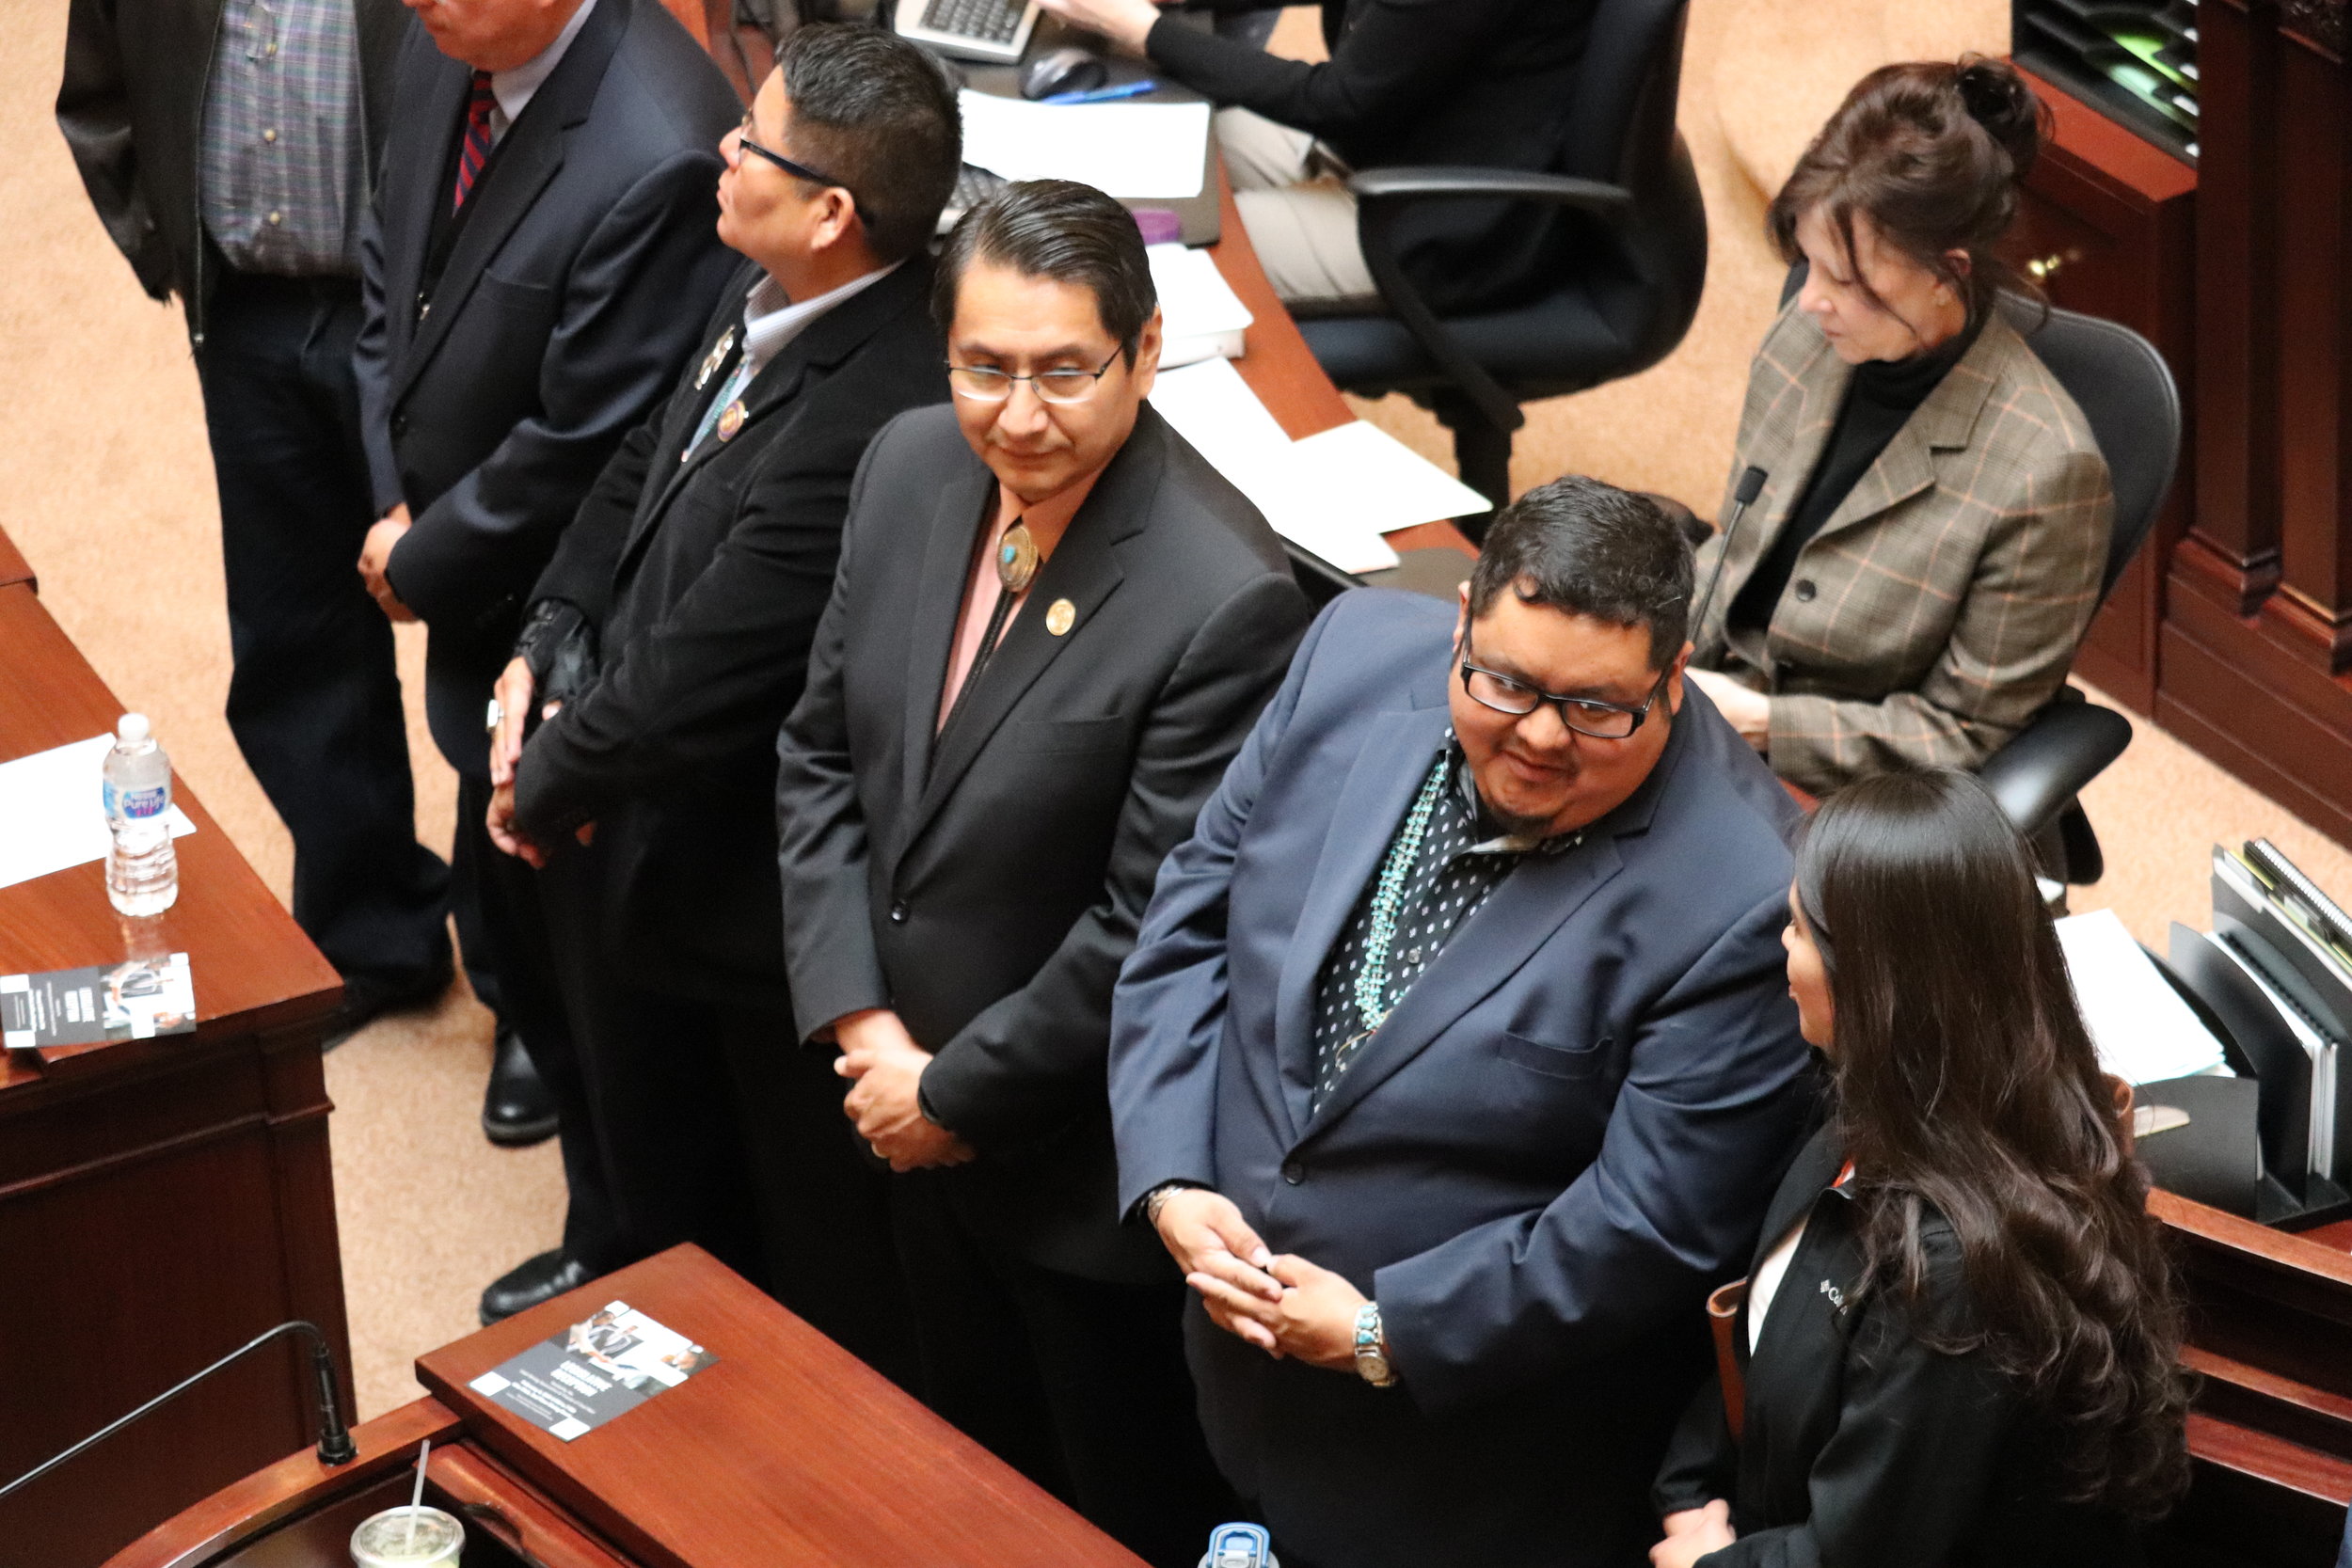 Representatives from the Navajo tribe were honored on the Senate floor.